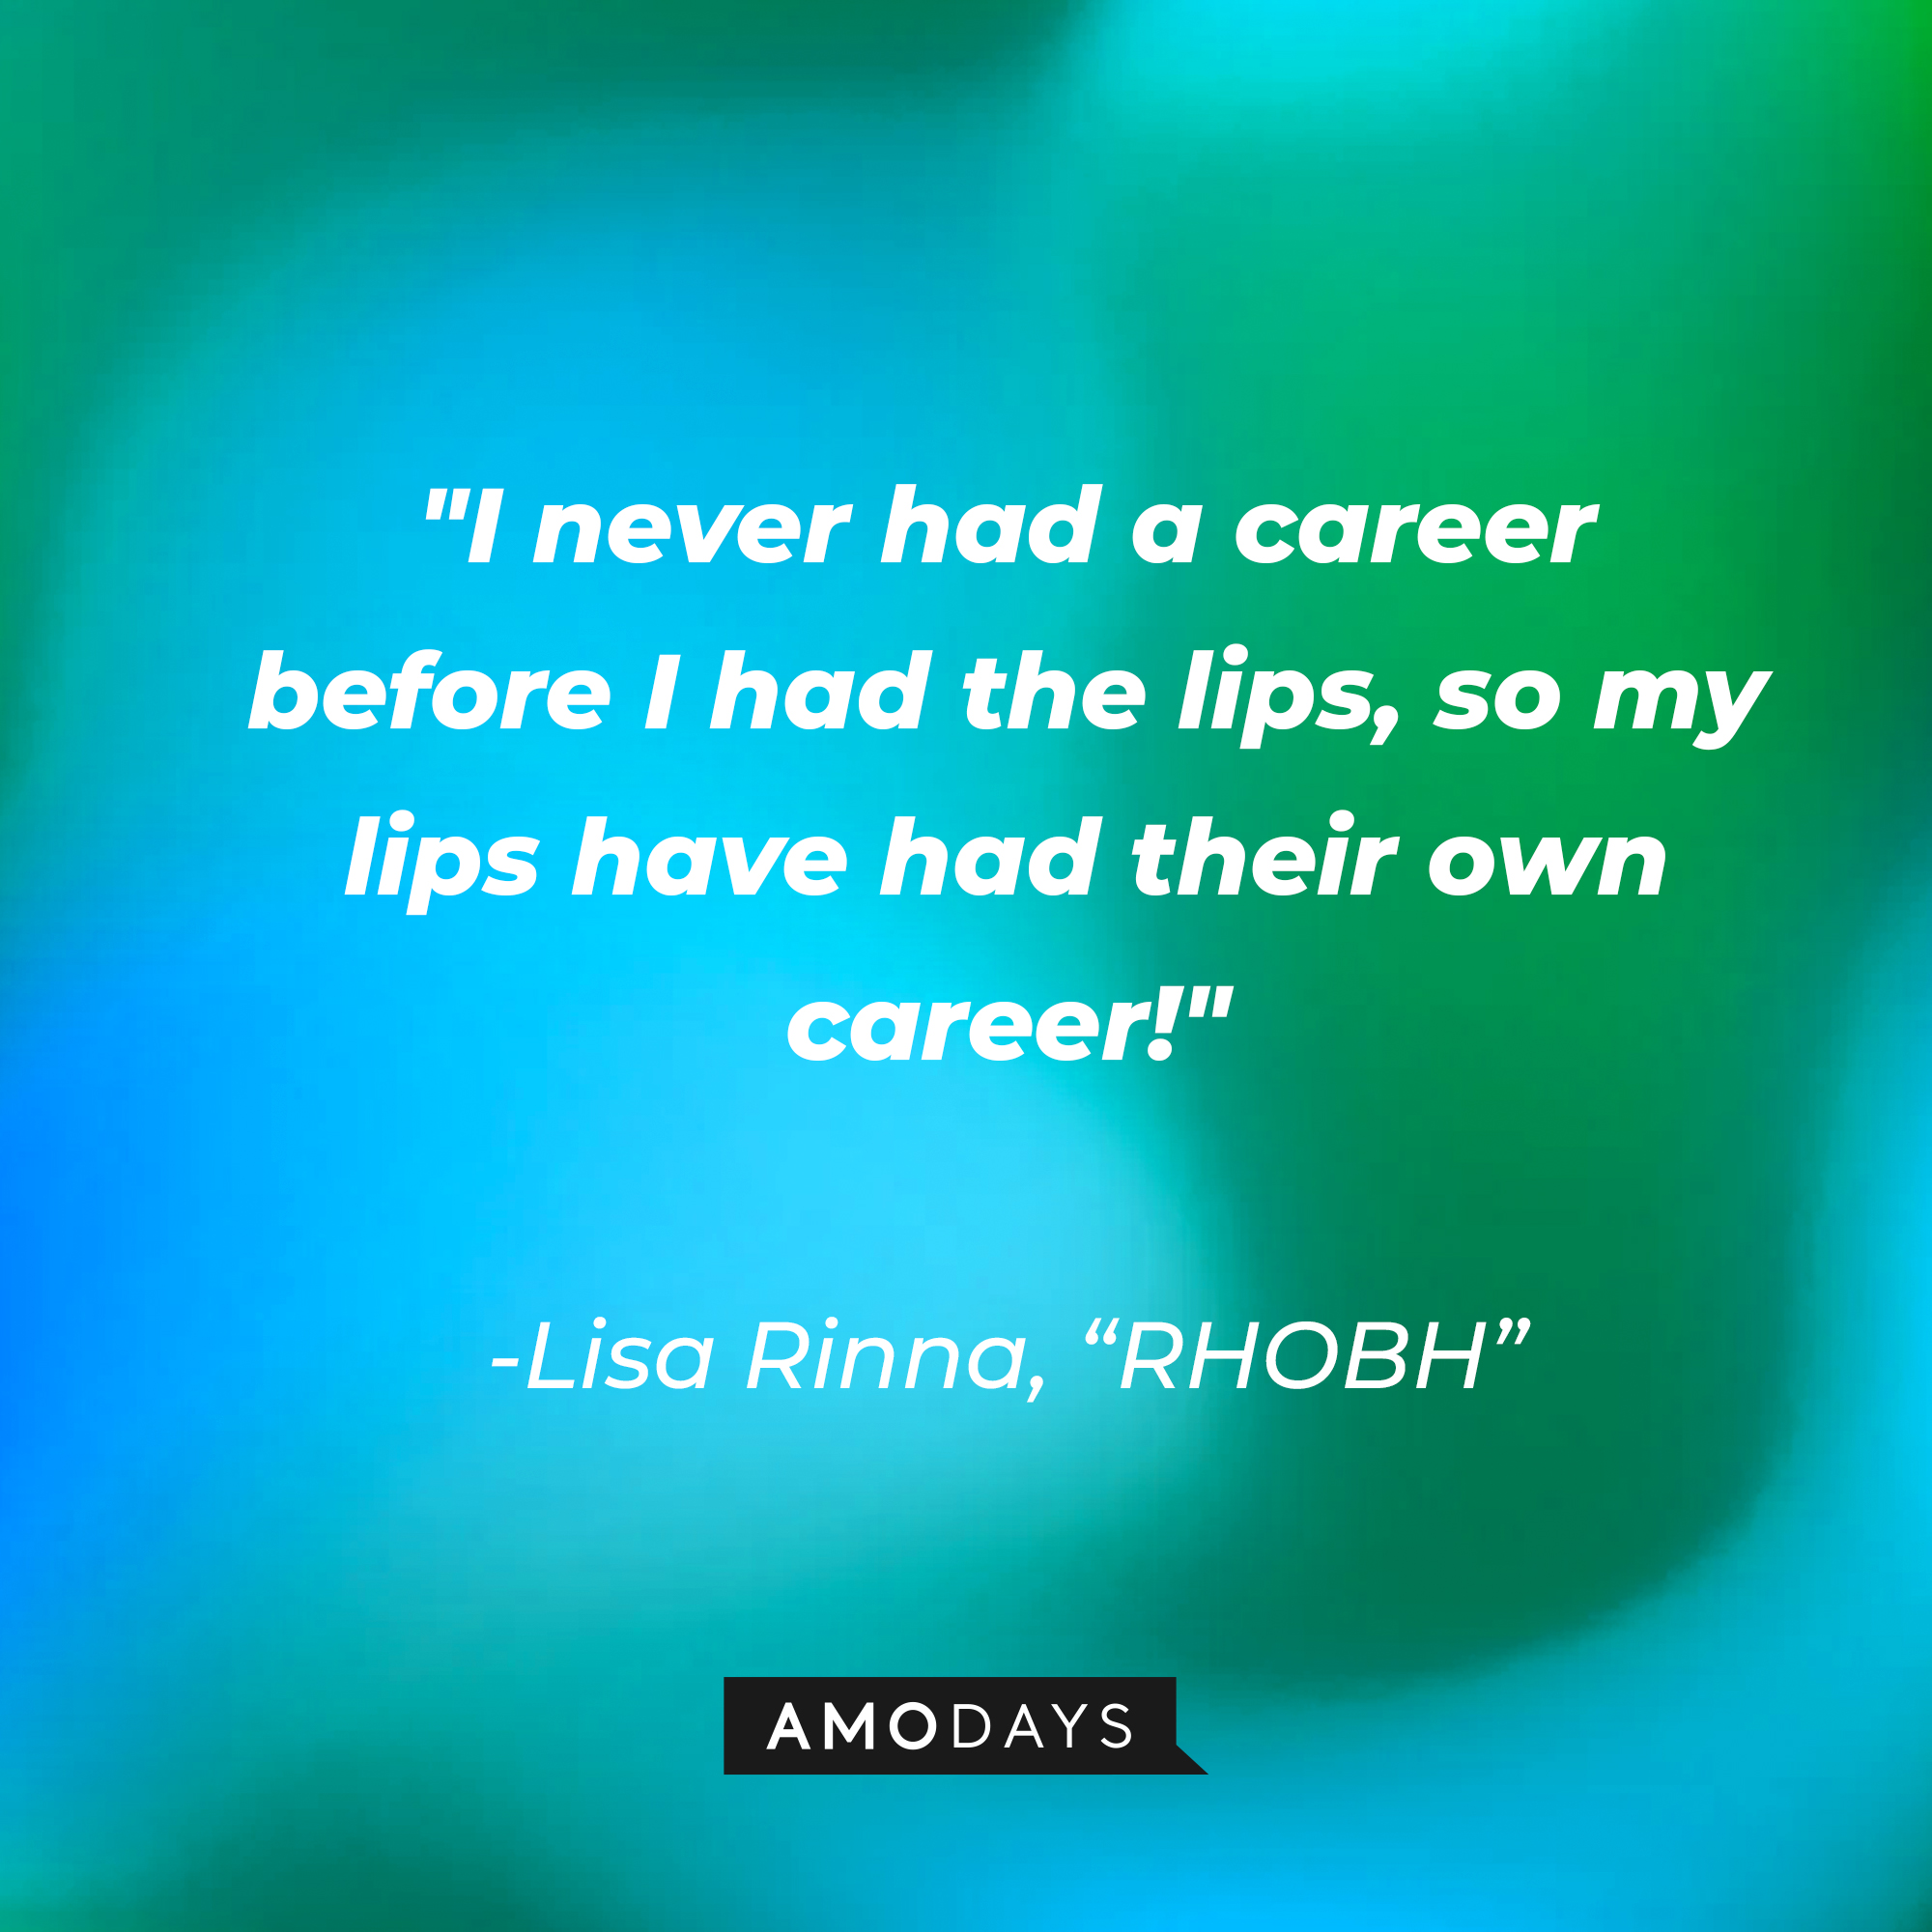 Lisa Rinna's quote from "The Real Housewives of Beverly Hills:" "I never had a career before I had the lips, so my lips have had their own career!" | Source: AmoDays